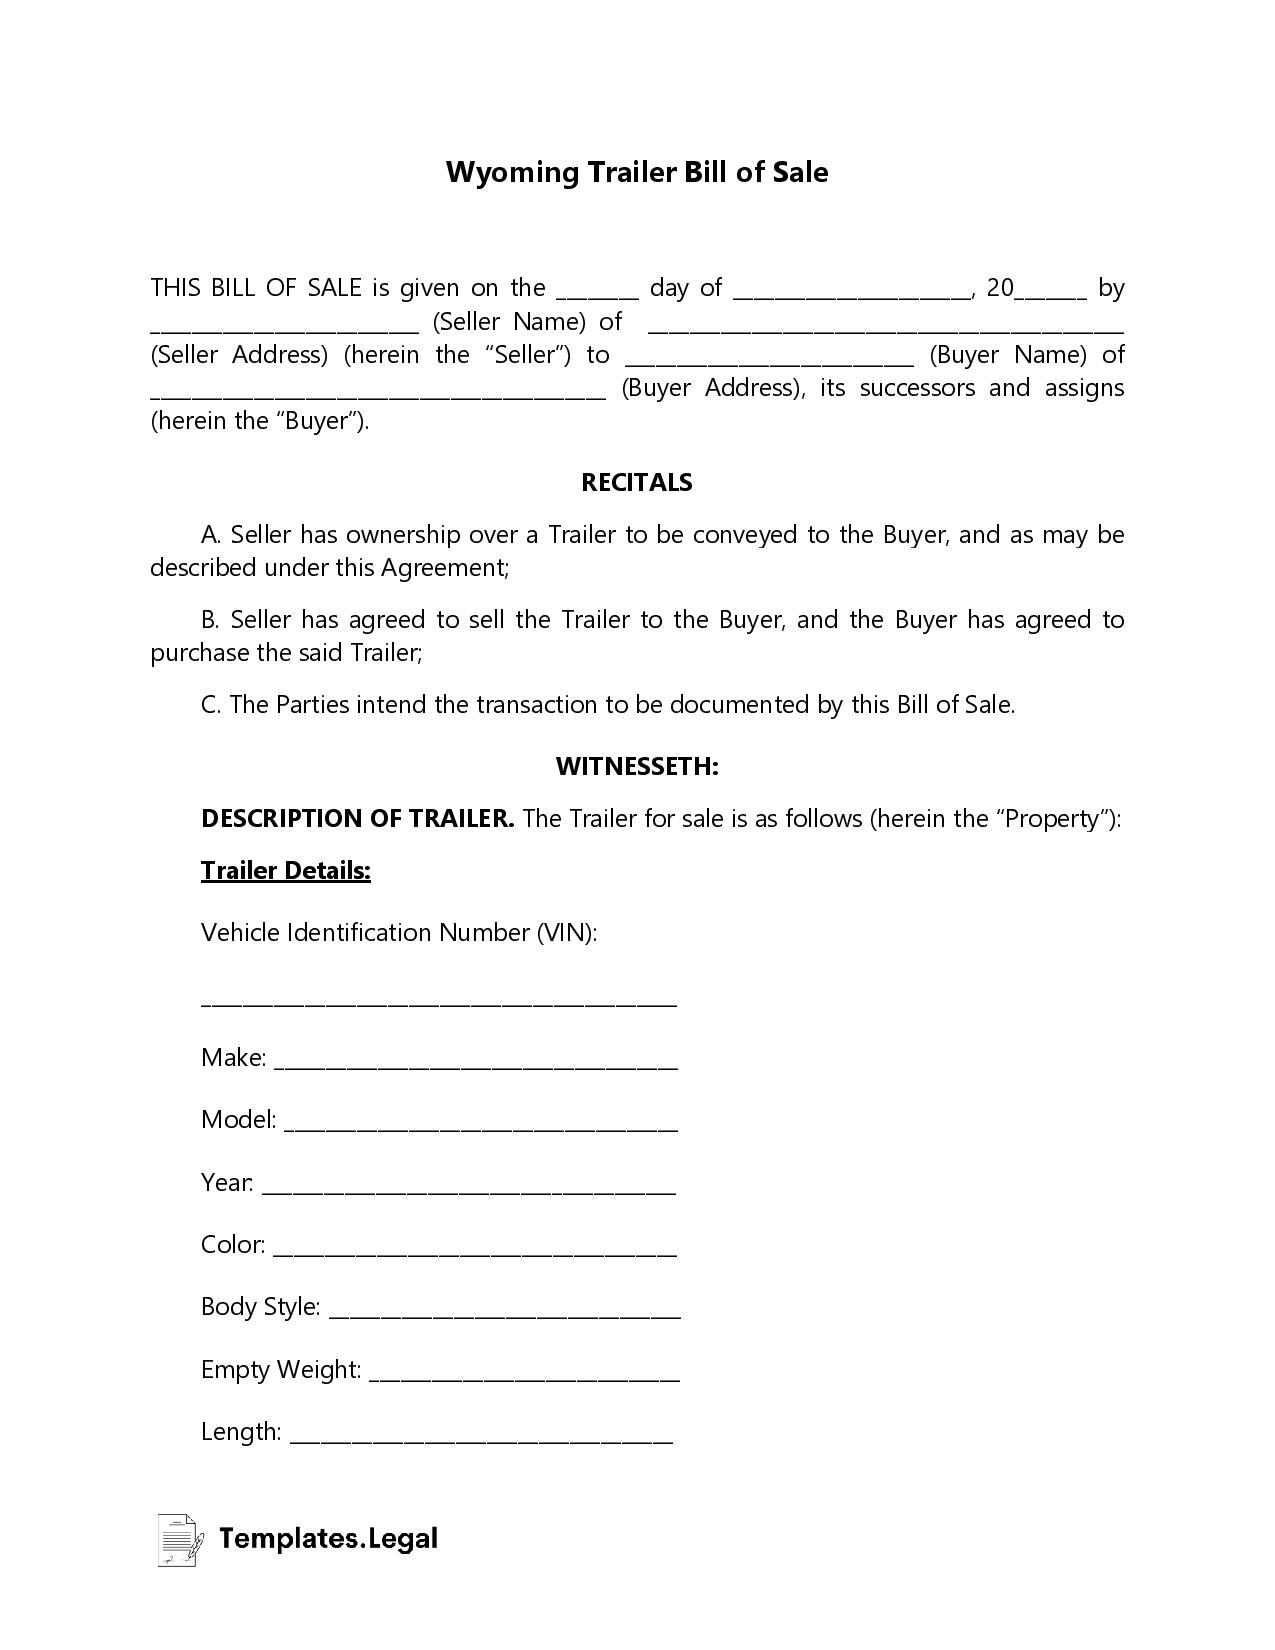 Wyoming Trailer Bill of Sale - Templates.Legal